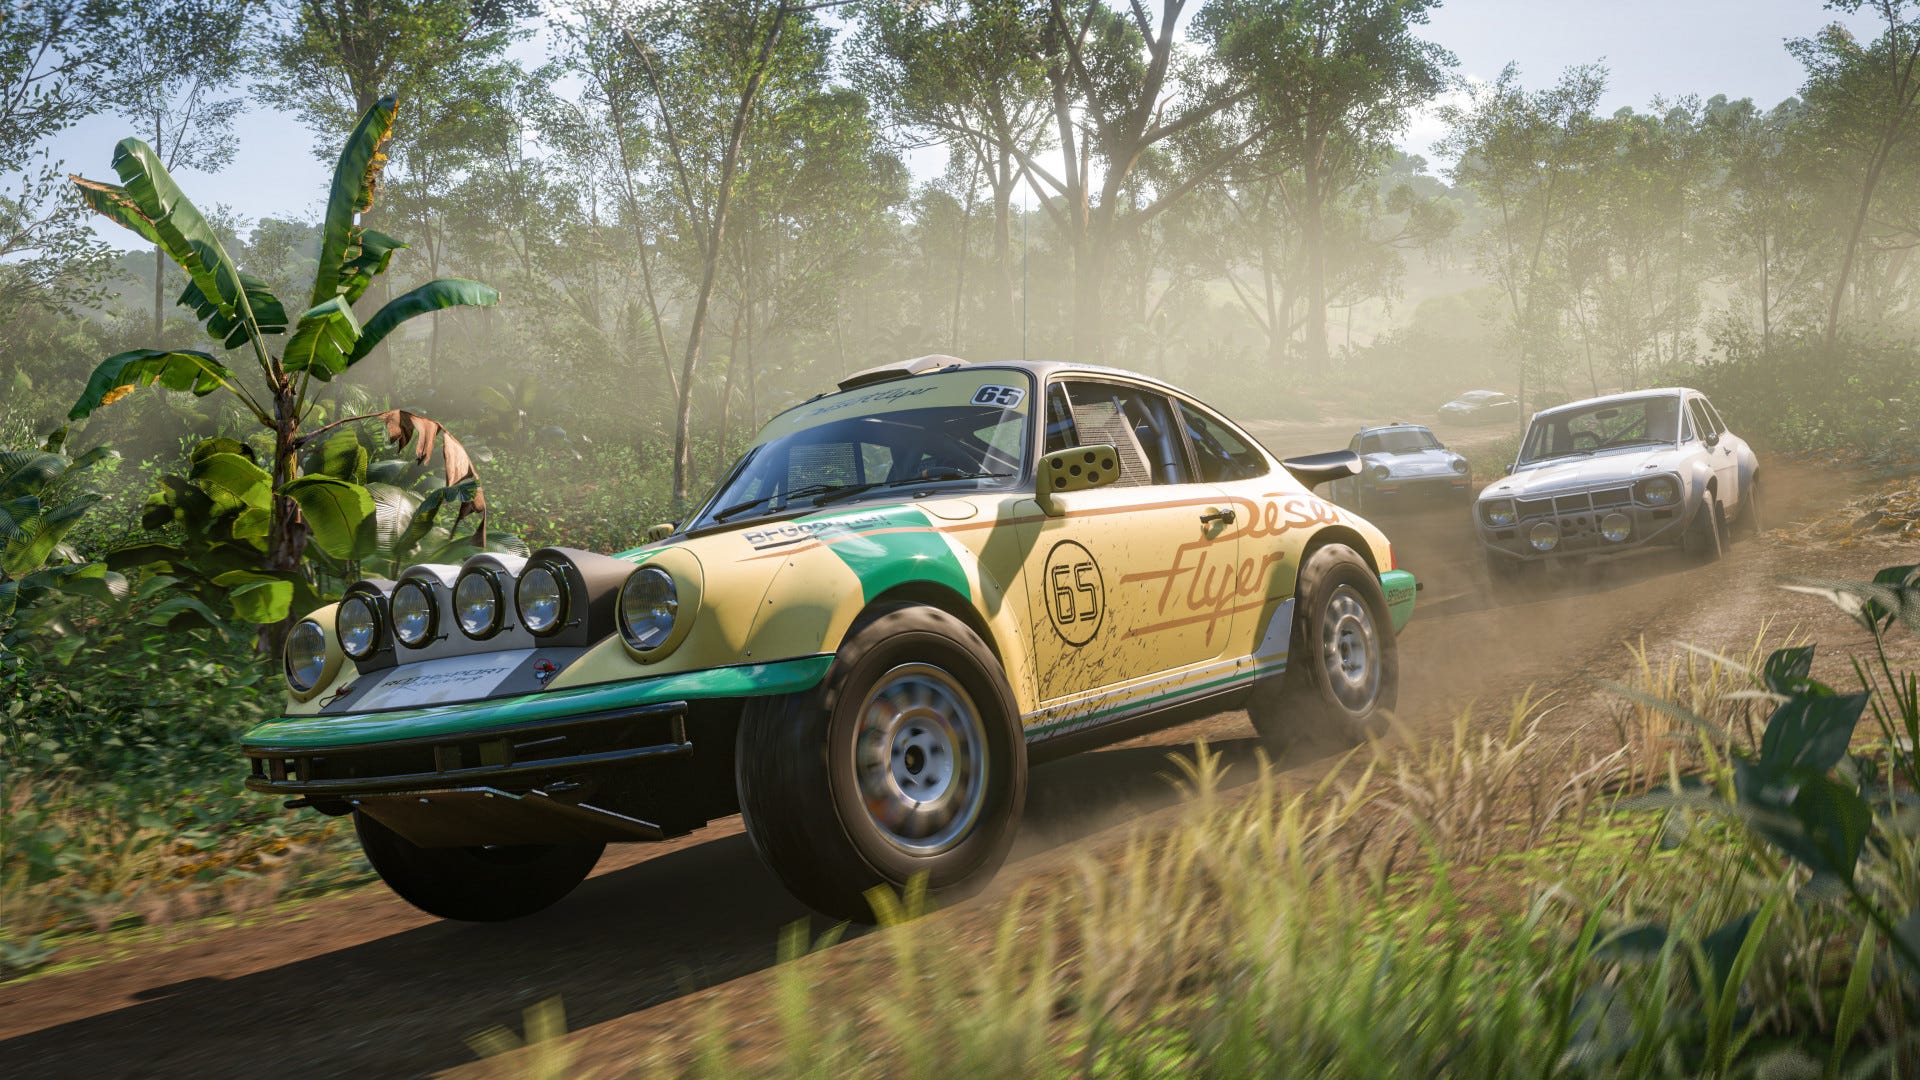 Forza Horizon 5 update adds new cars, overlanding modifications and photo mode features